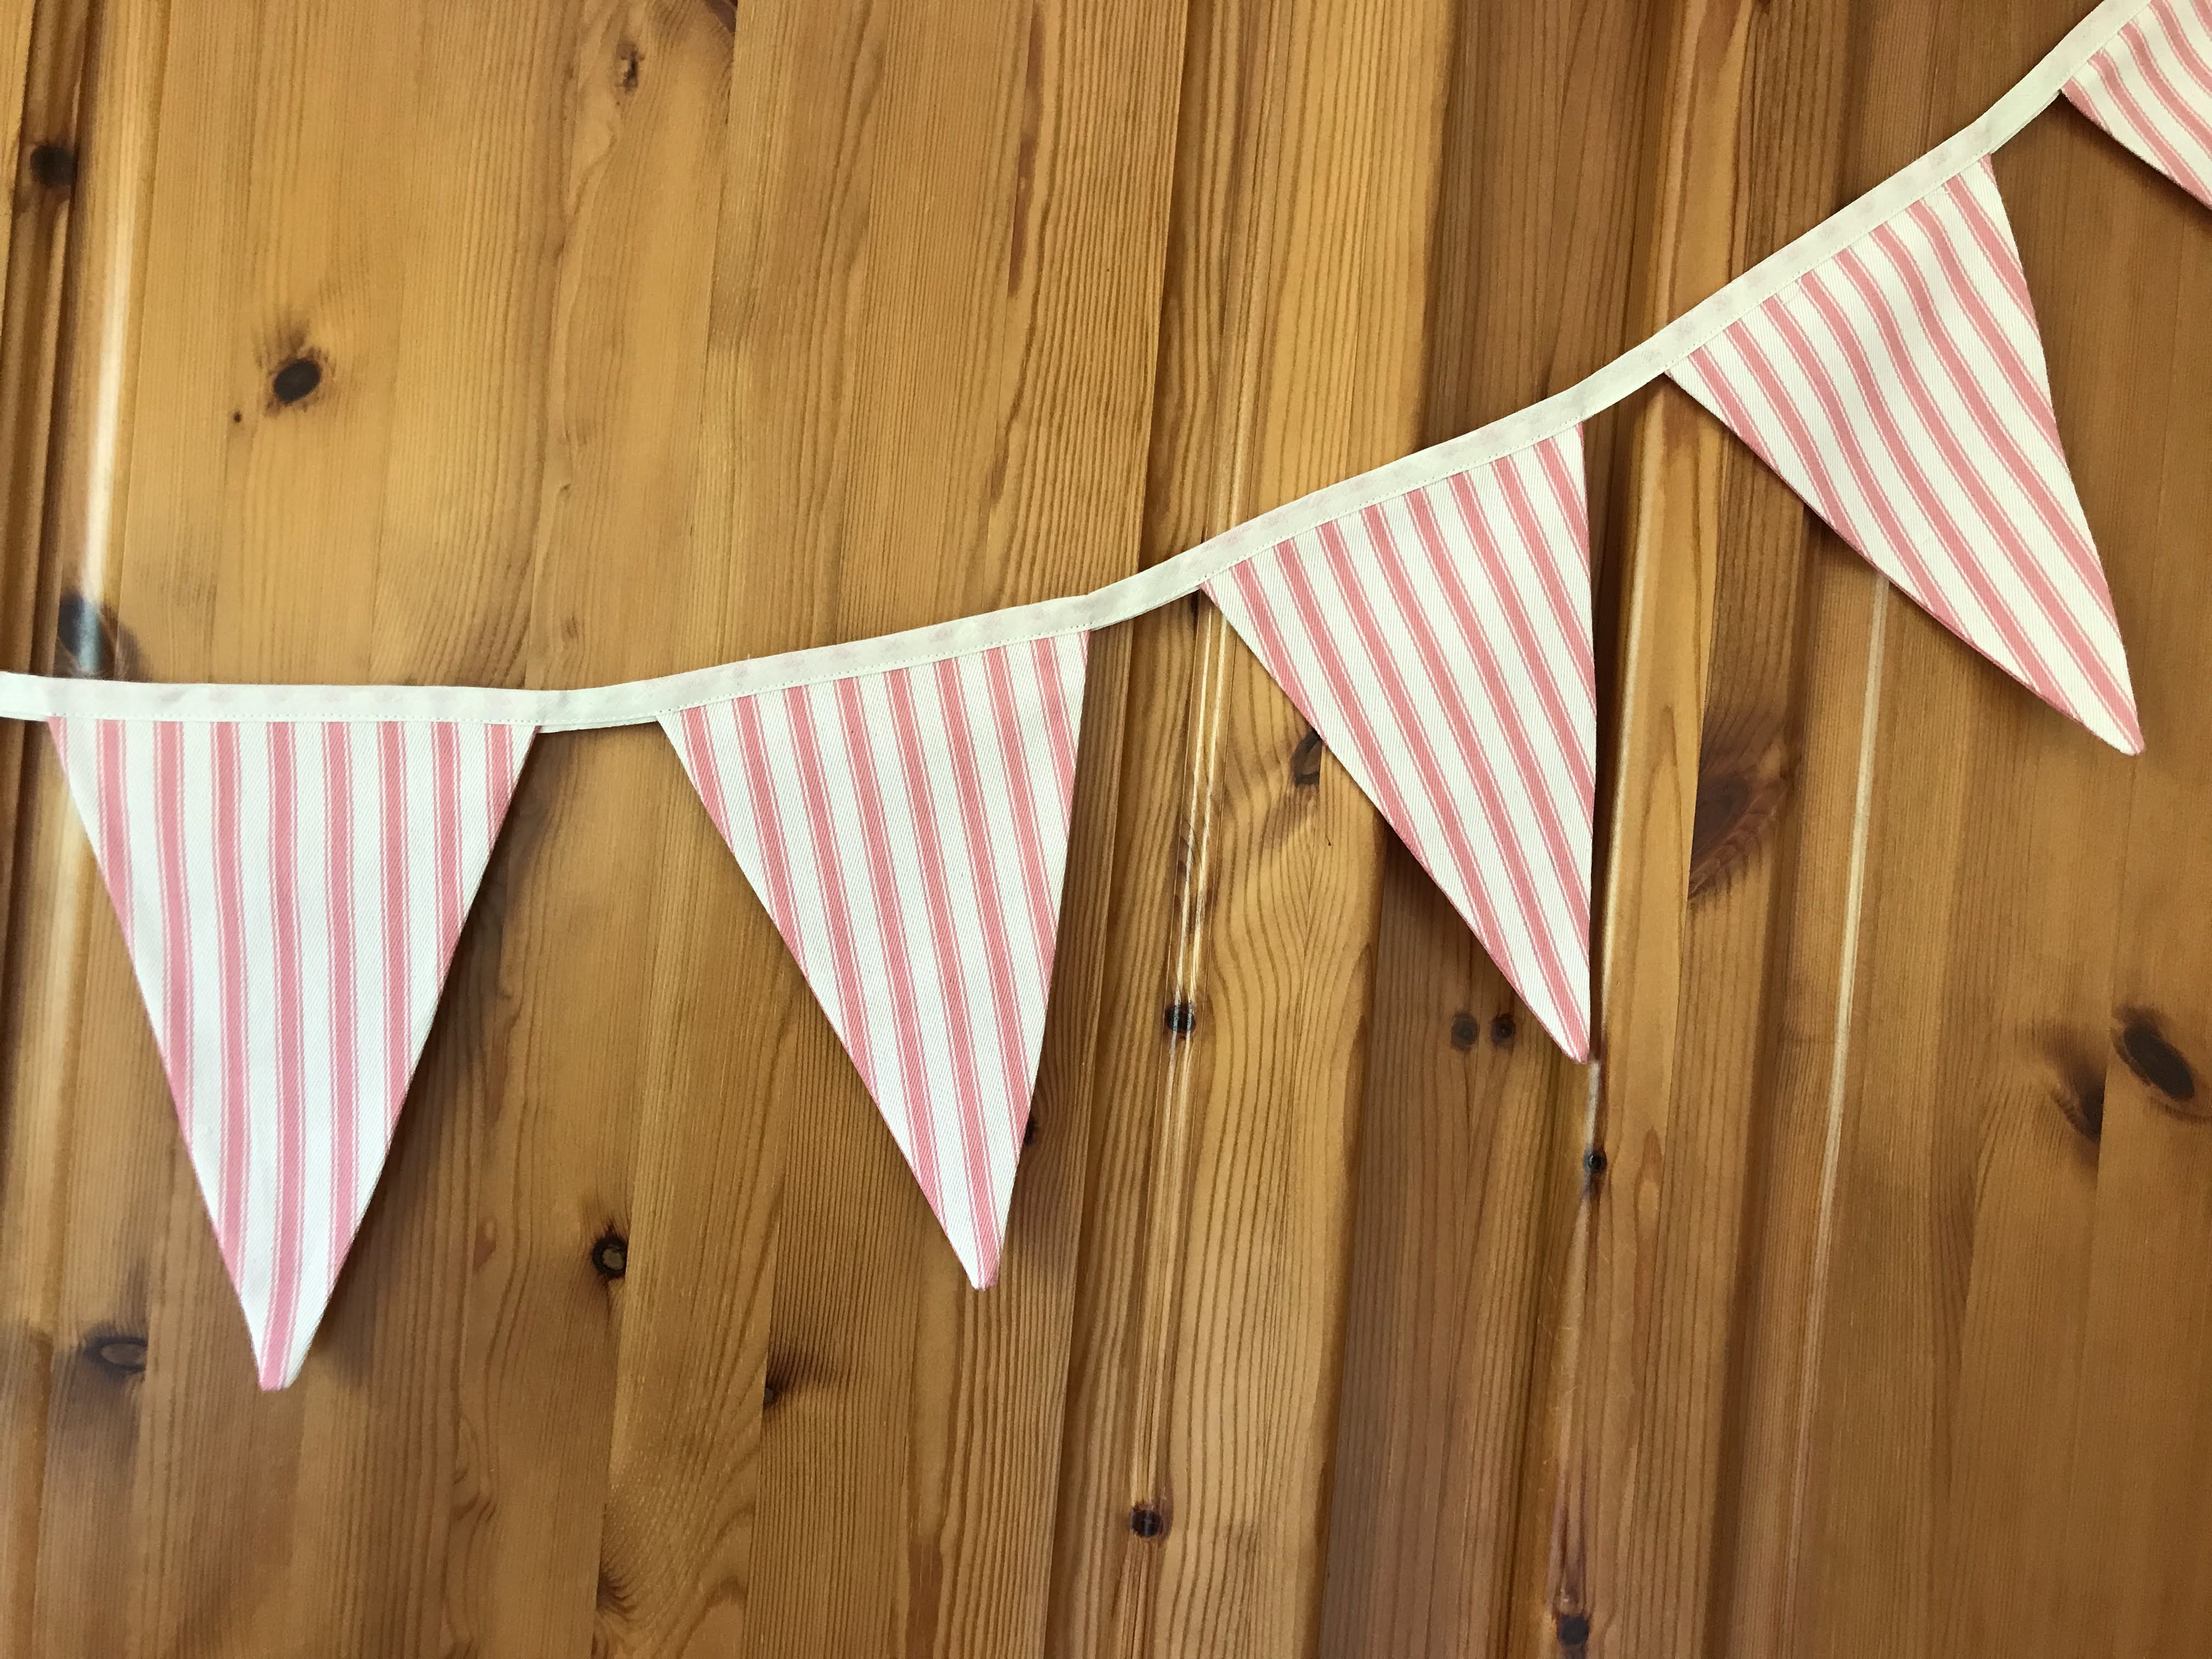 Bunting - pink and white stripe